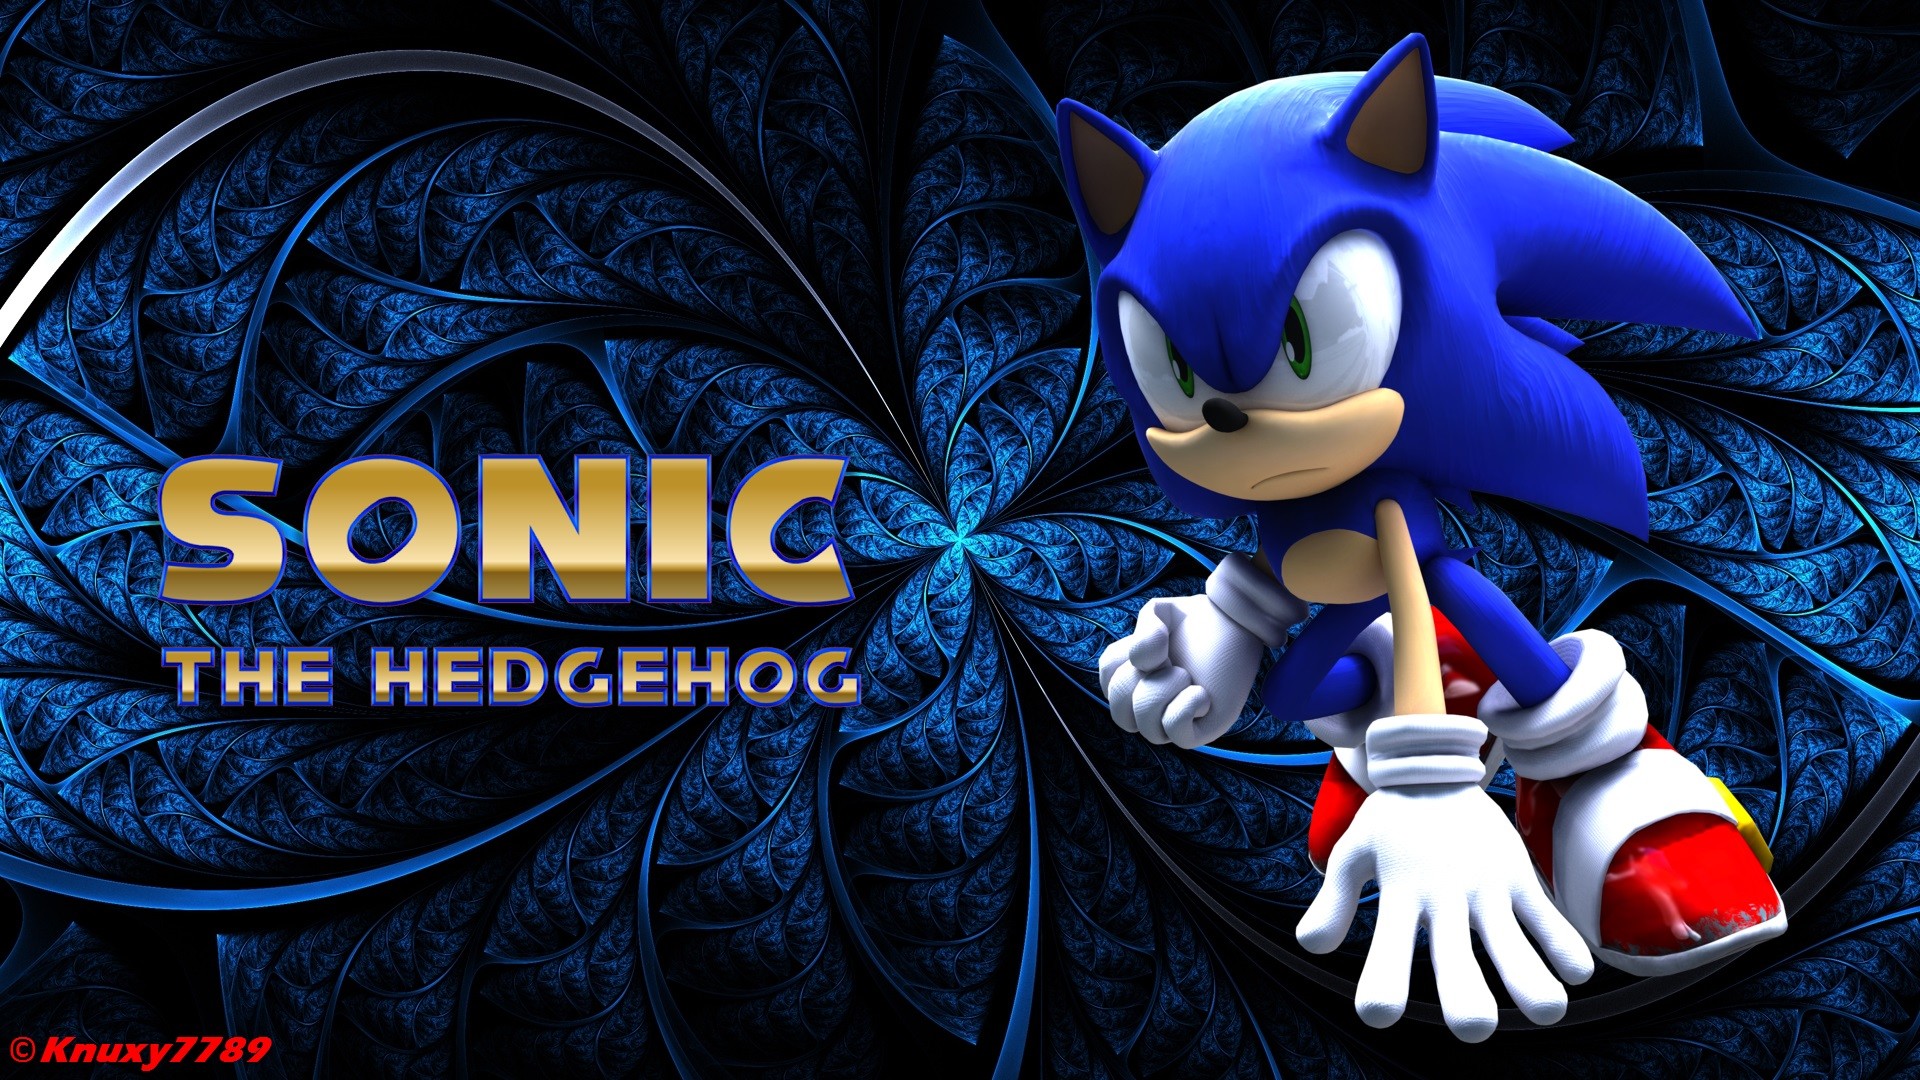 1920x1080 sonic the hedgehog wallpaper by knuxy7789 hd wallpapers high definition  amazing cool desktop wallpapers for windows mac download free 1920Ã1080  Wallpaper HD